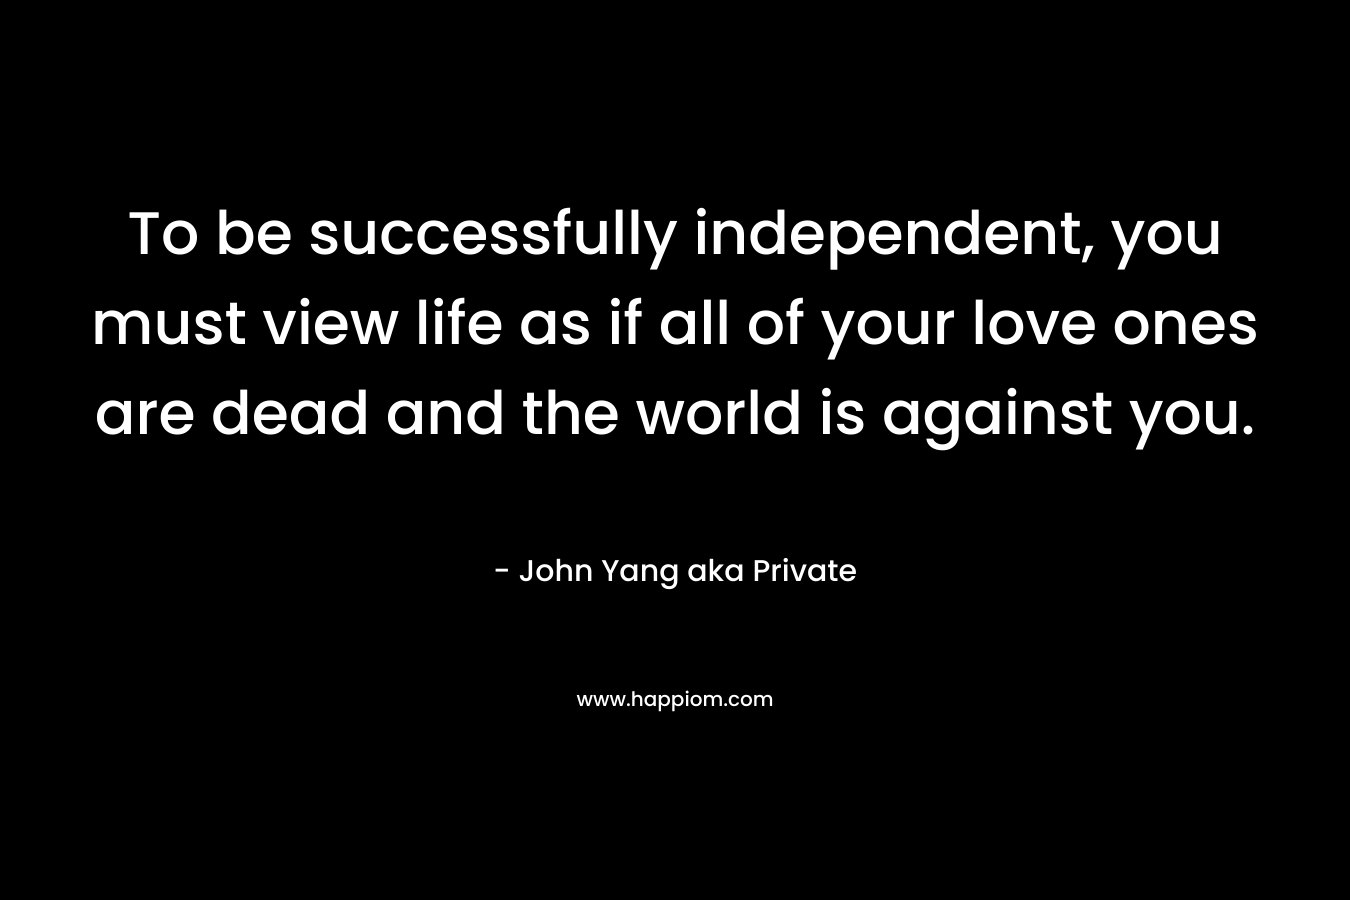 To be successfully independent, you must view life as if all of your love ones are dead and the world is against you. – John Yang aka Private